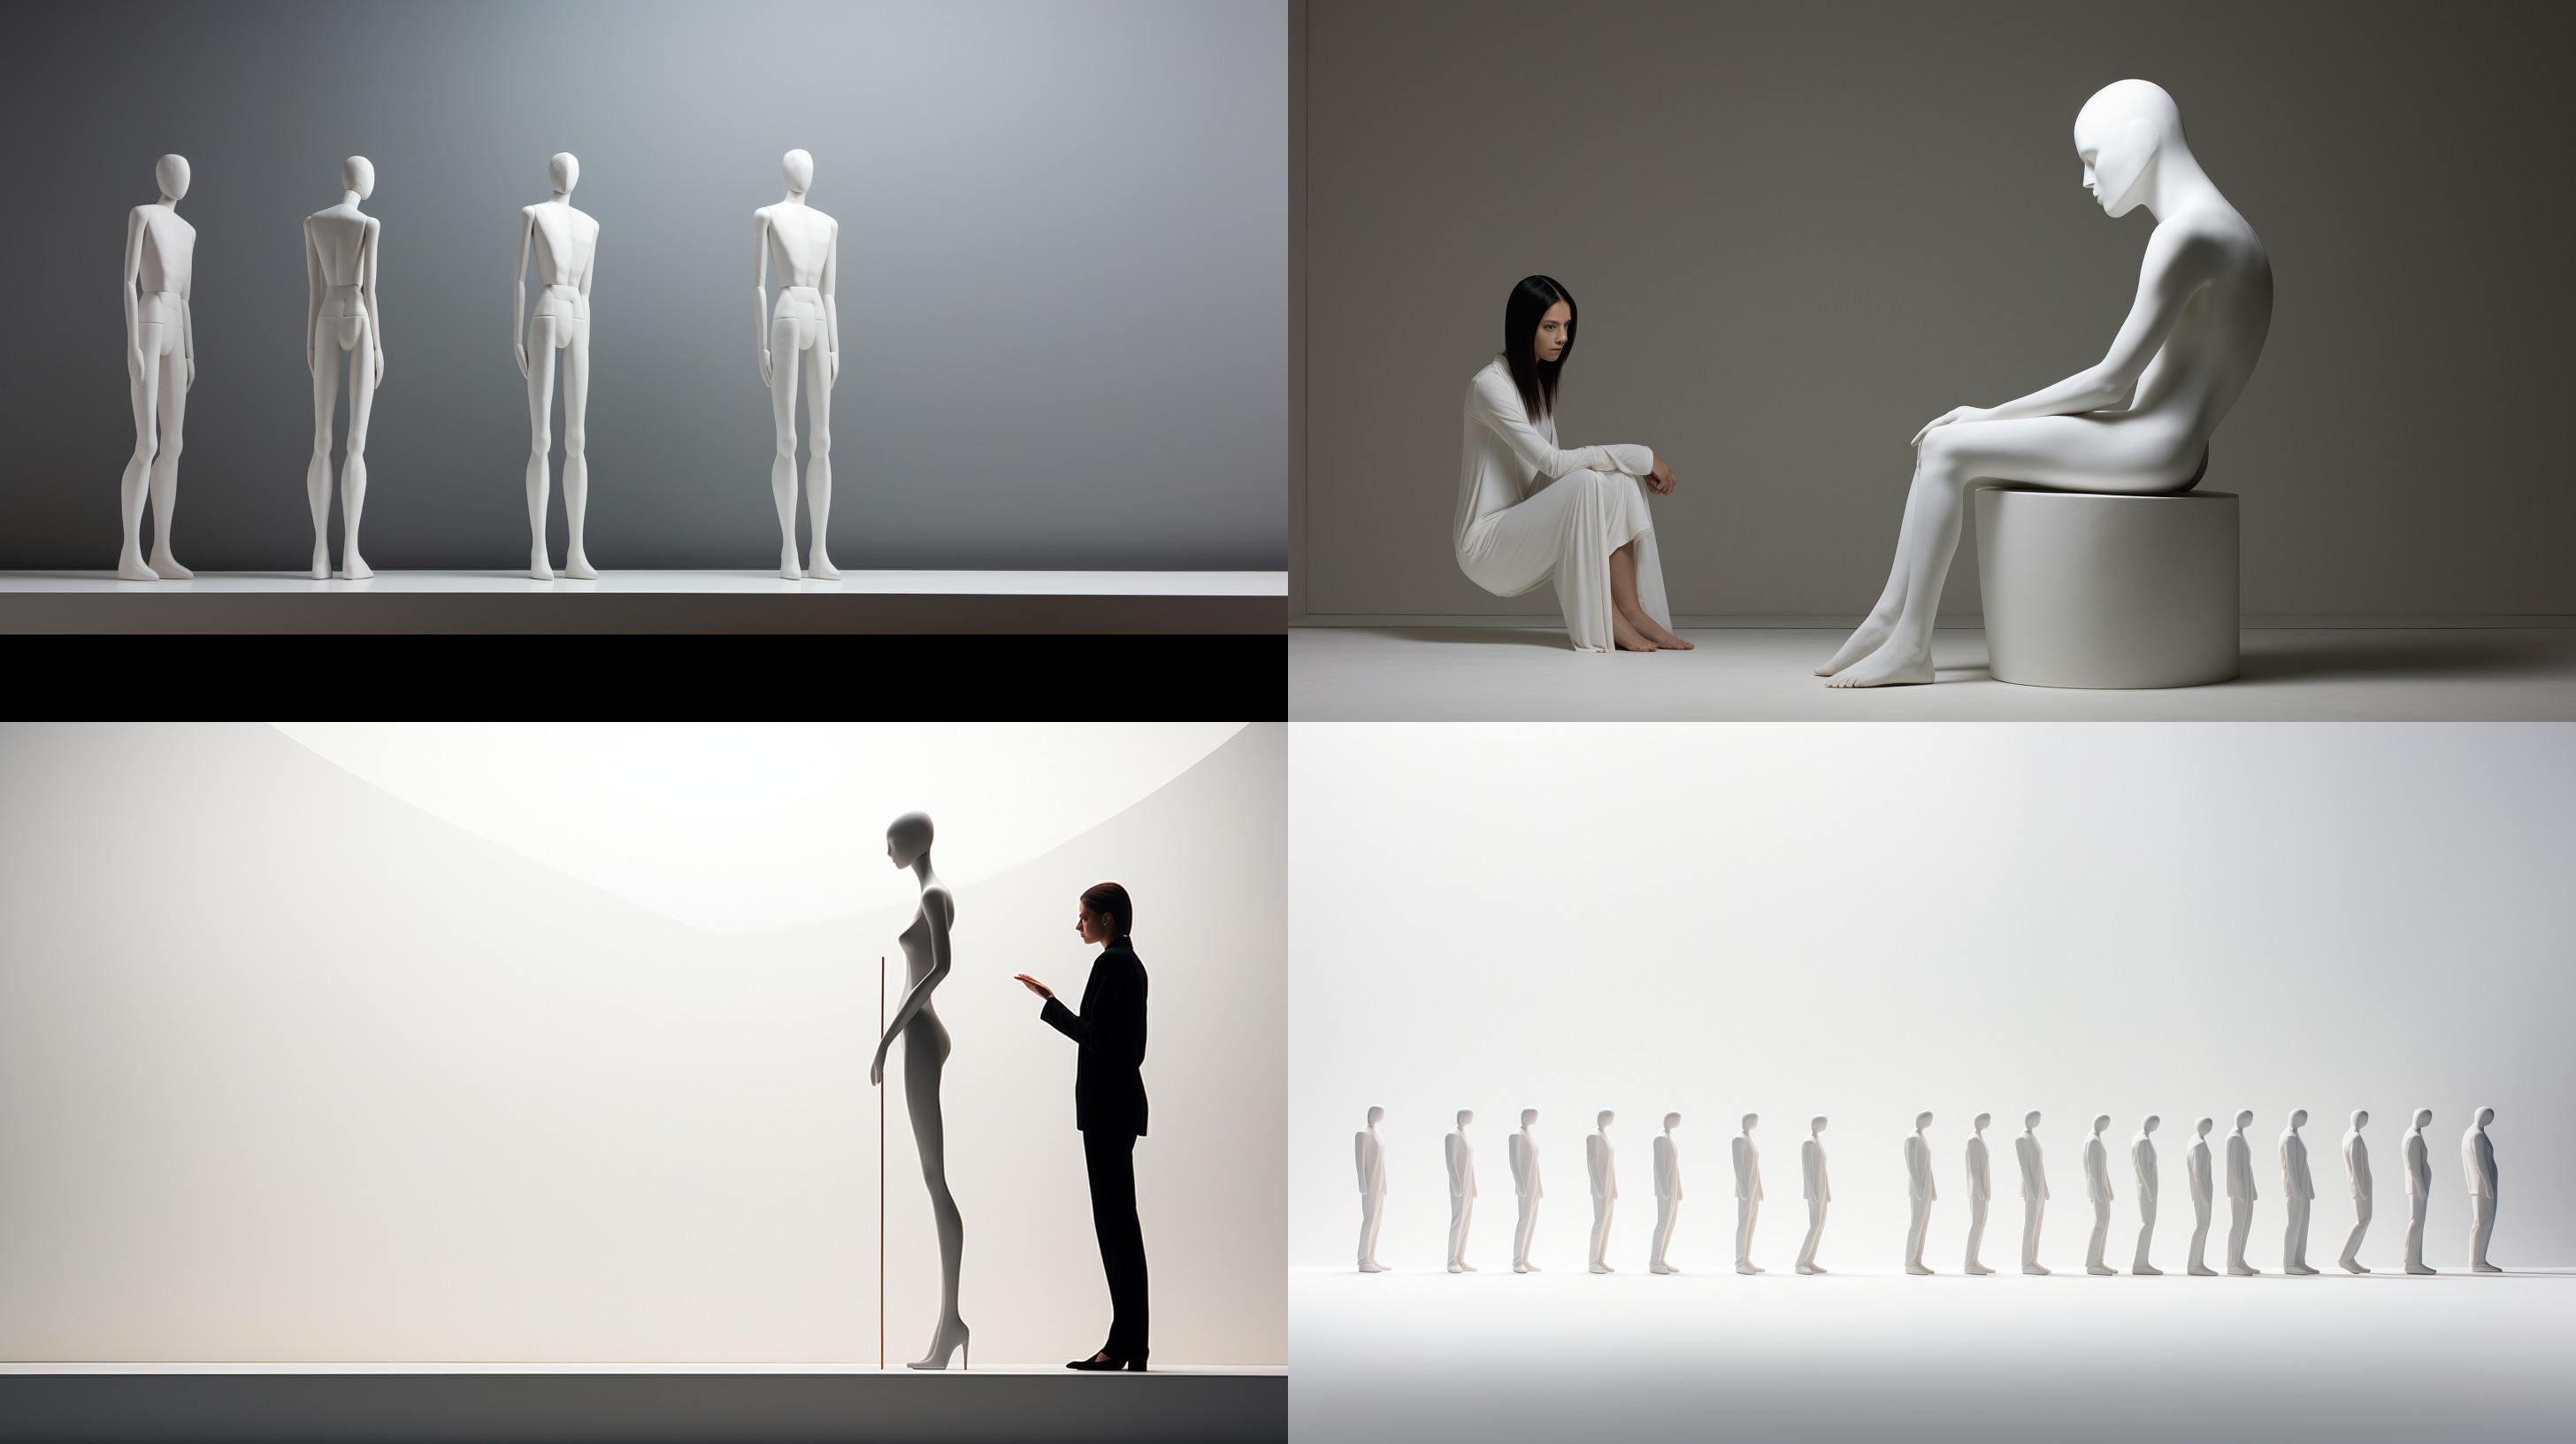 timmcclane_people_minimalist_sculpture_made_by_Javier_Marin_and_2336089d-3c0b-45eb-a7f8-2c342bec51d4